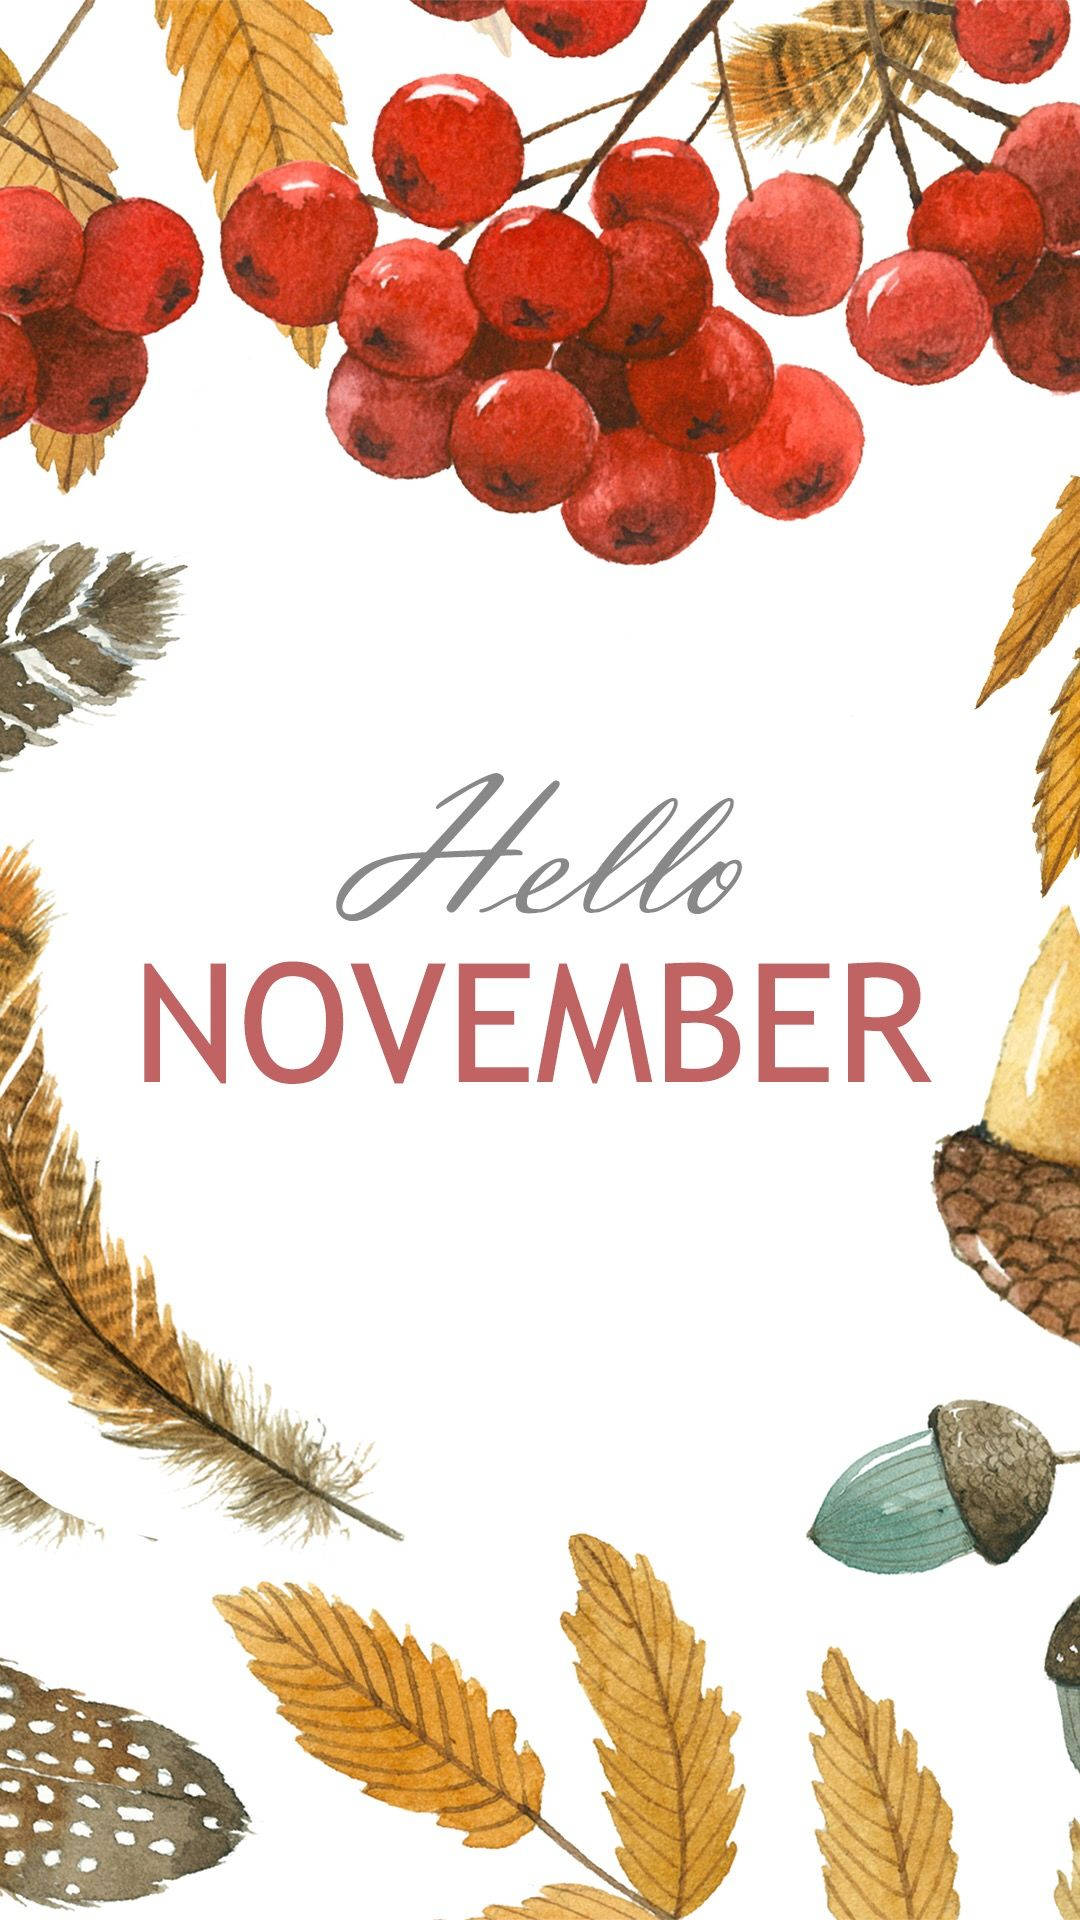 Upgrade Your Phone to the Latest November iPhone Wallpaper